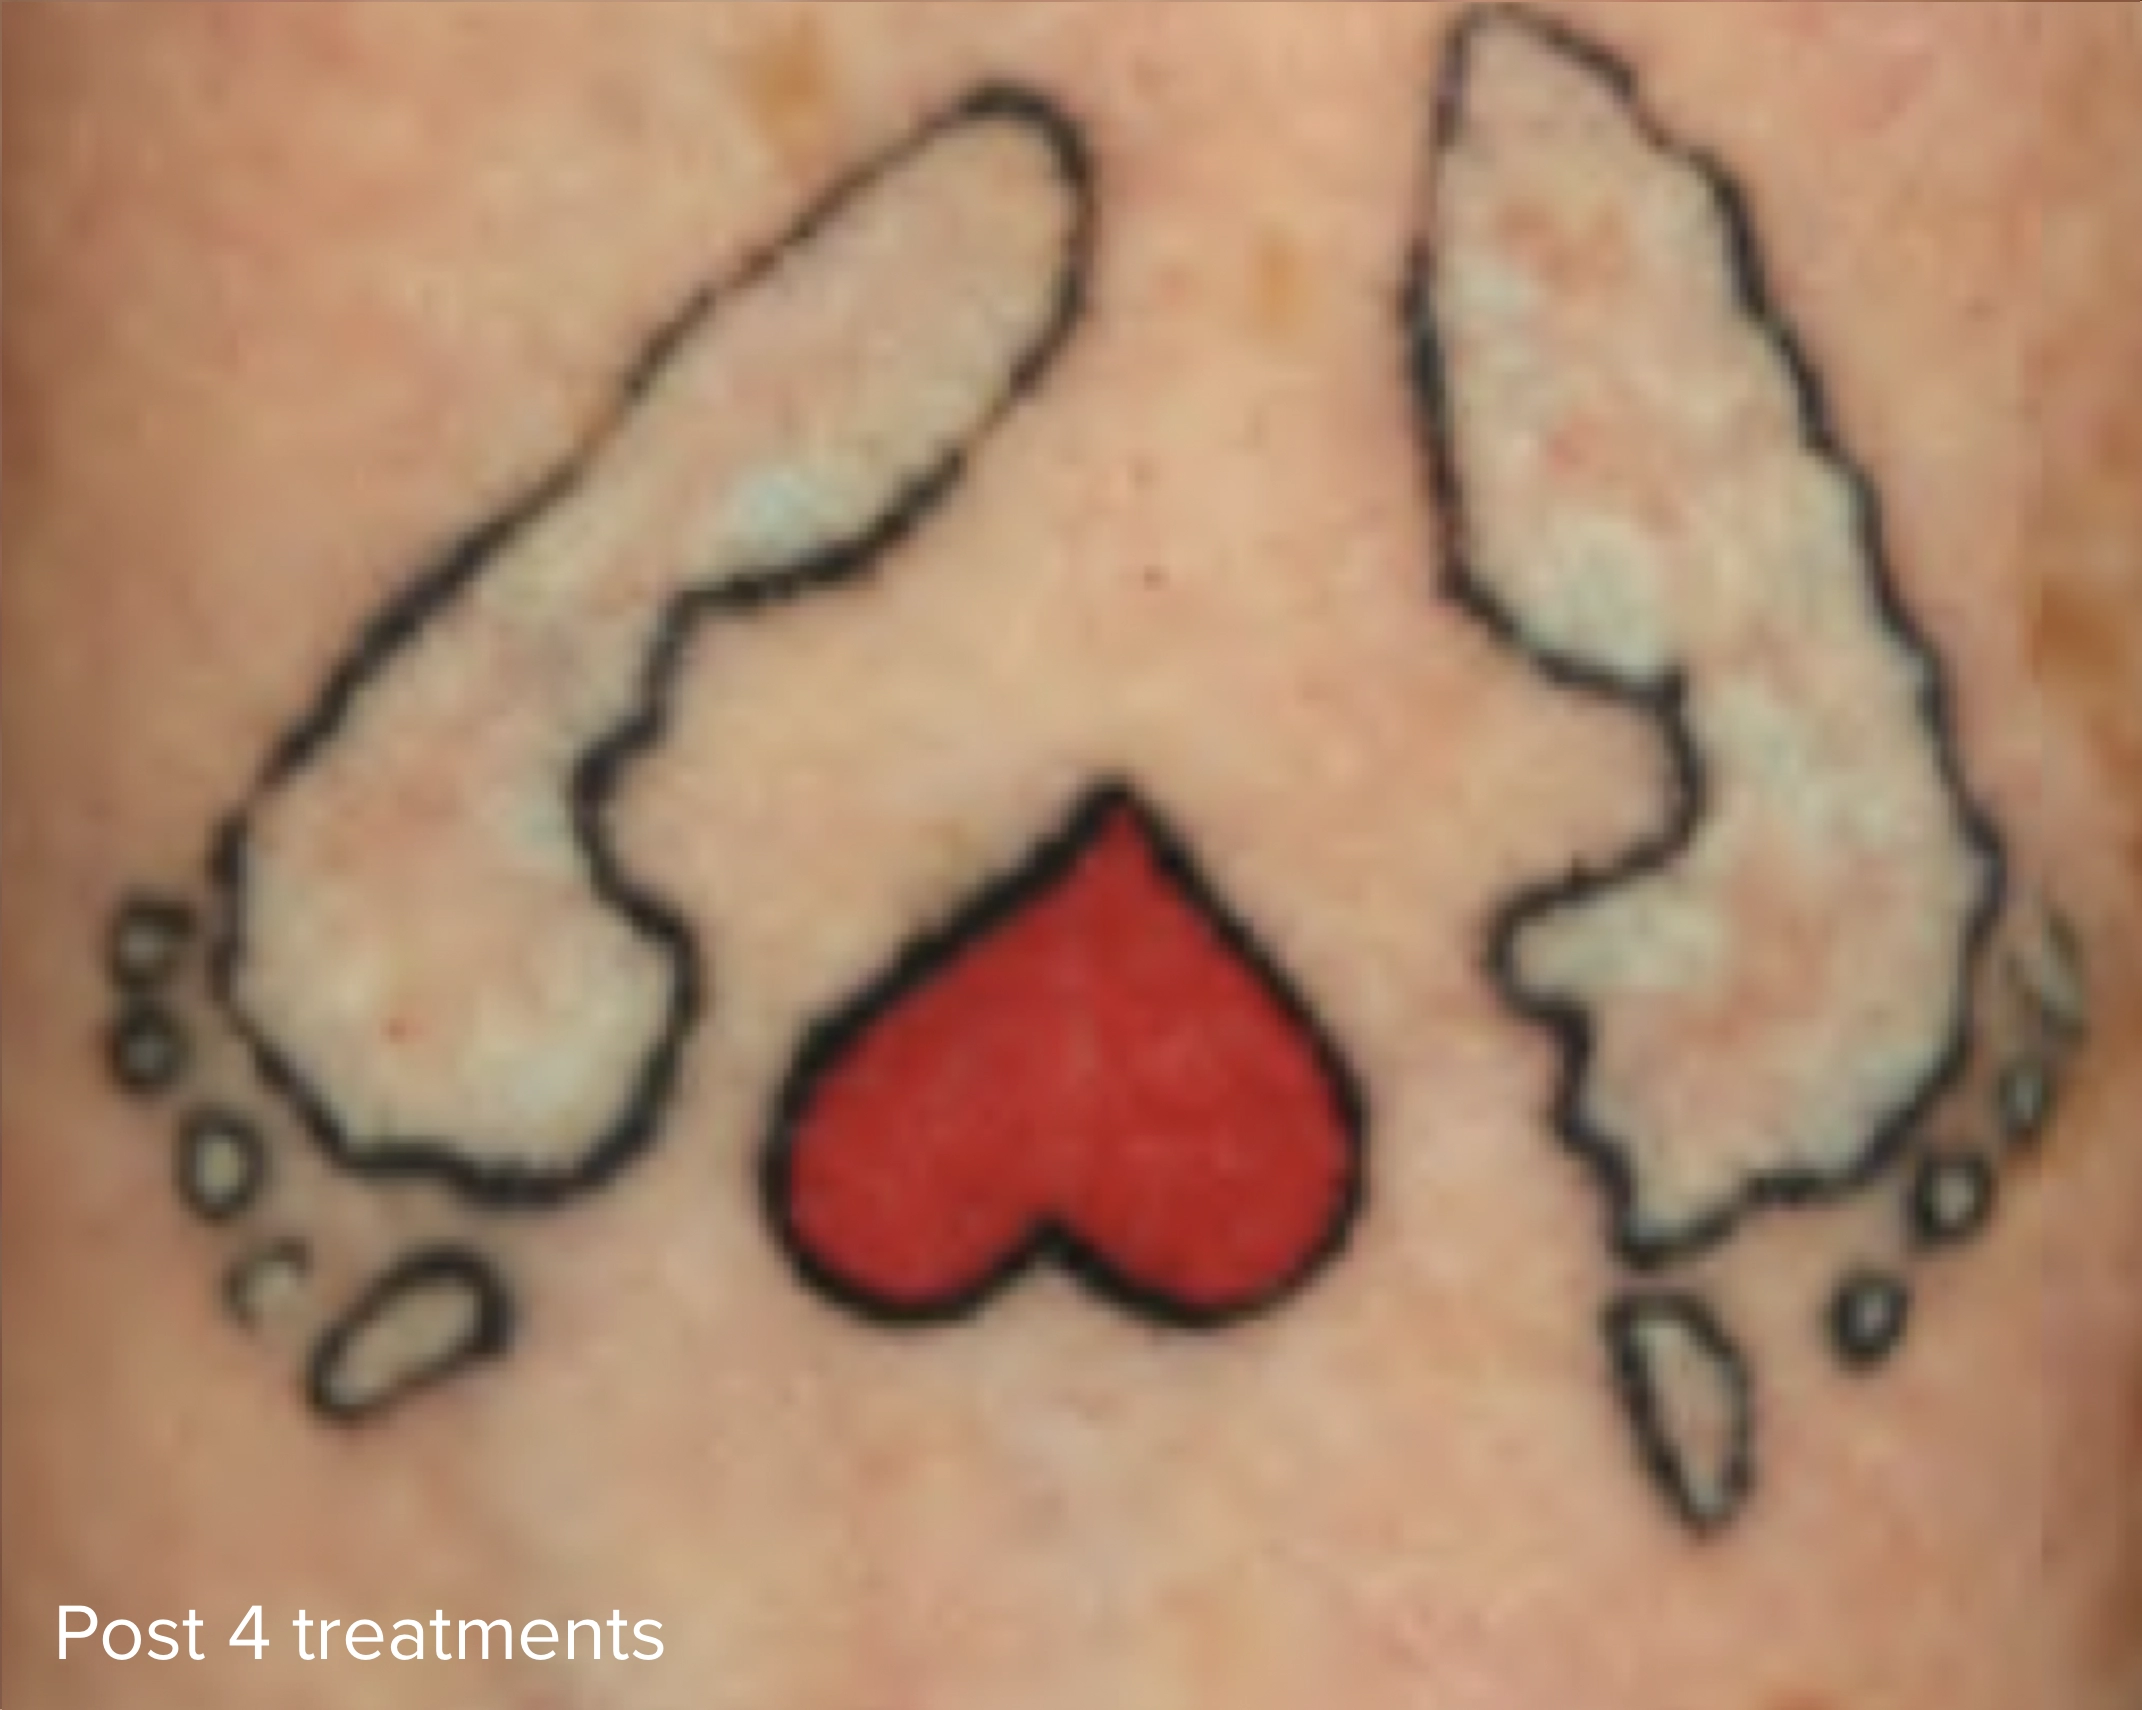 Colour Laser Tattoo Removal Post Treatments